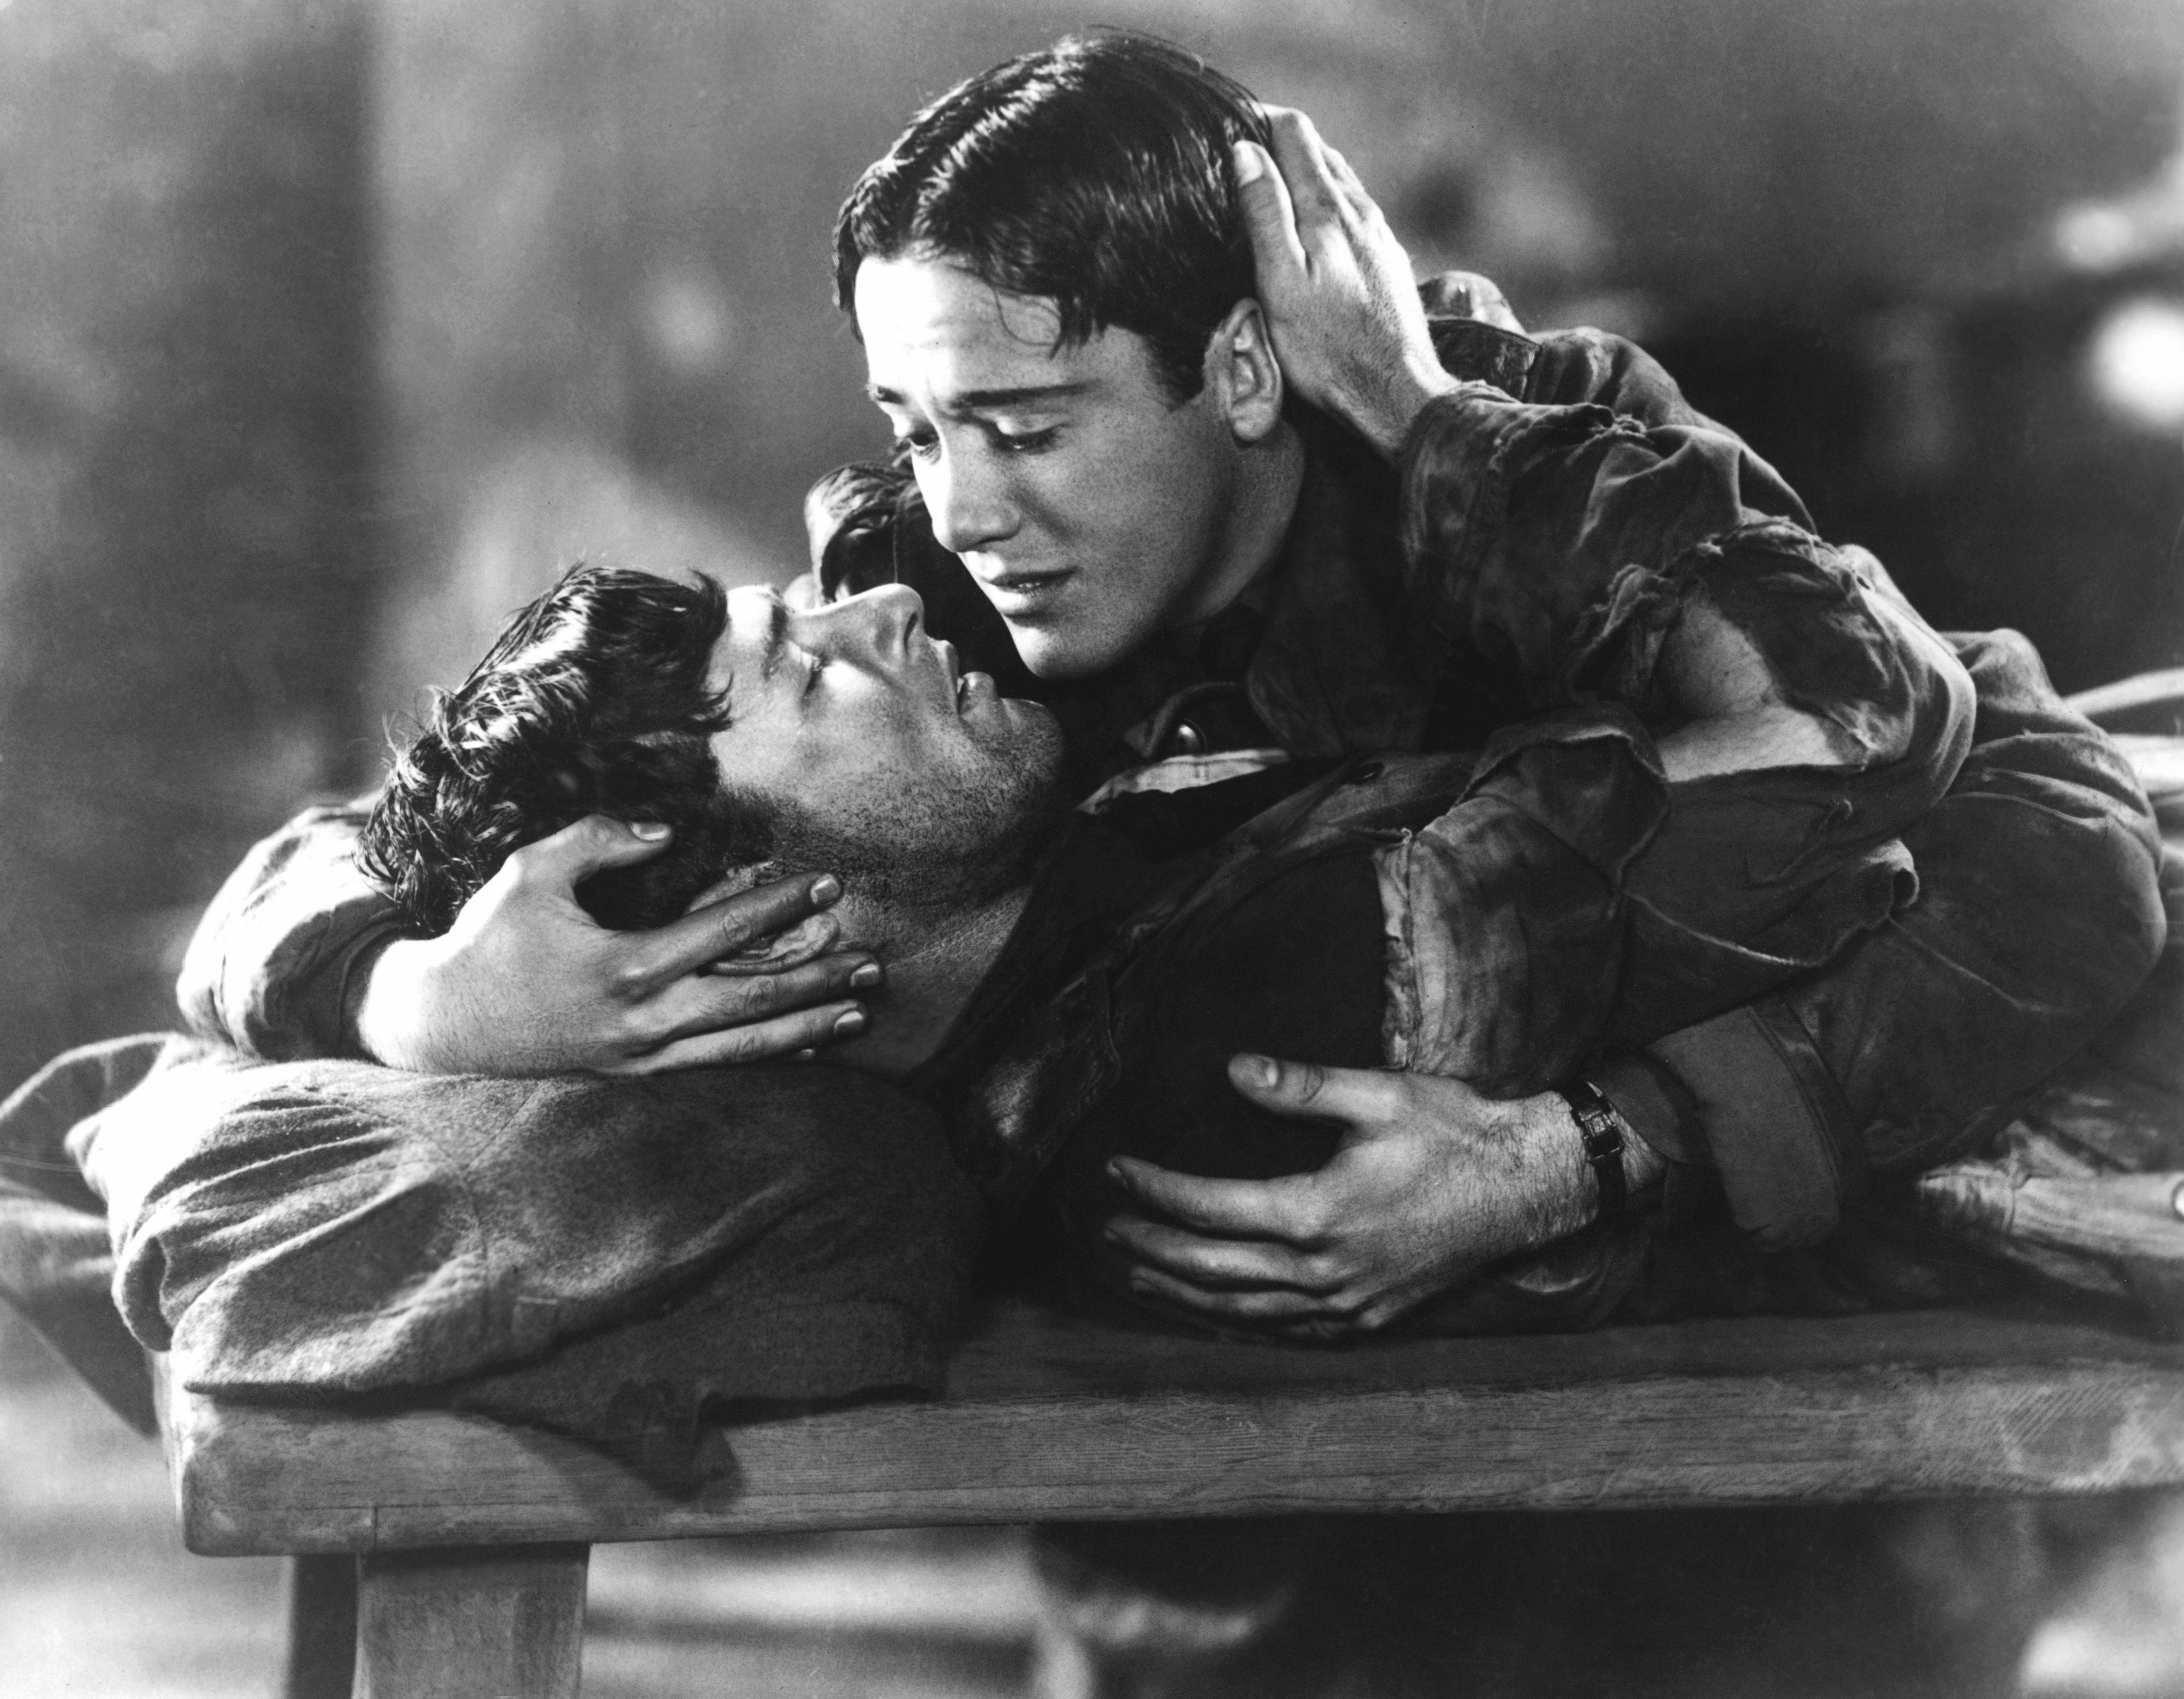 Scene from an old movie with two characters in an emotional embrace, one lying down with head supported by the other